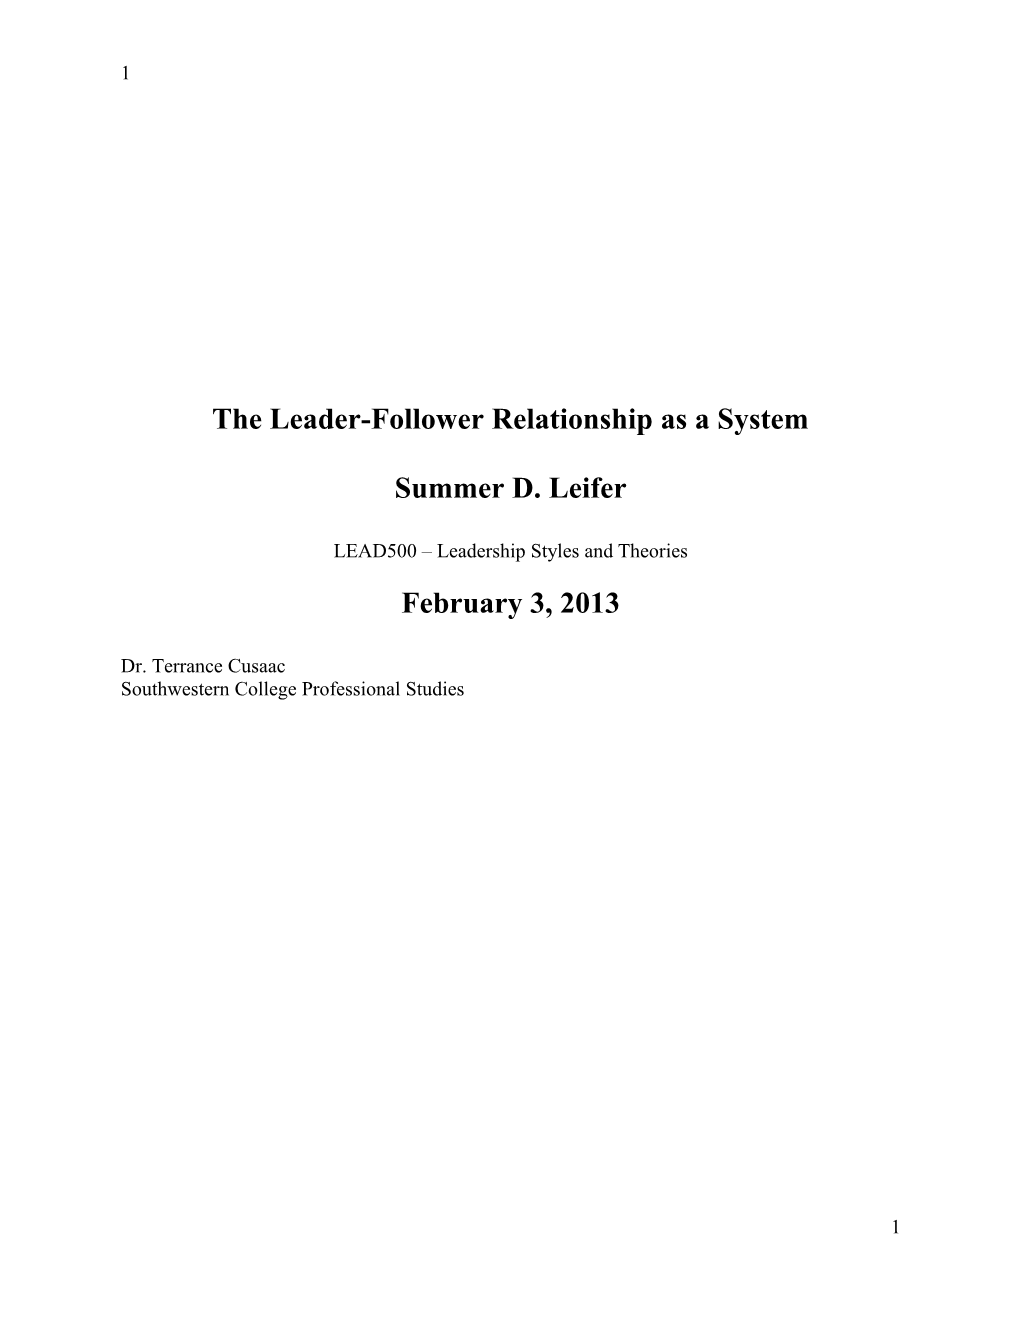 The Leader-Follower Relationship As a System